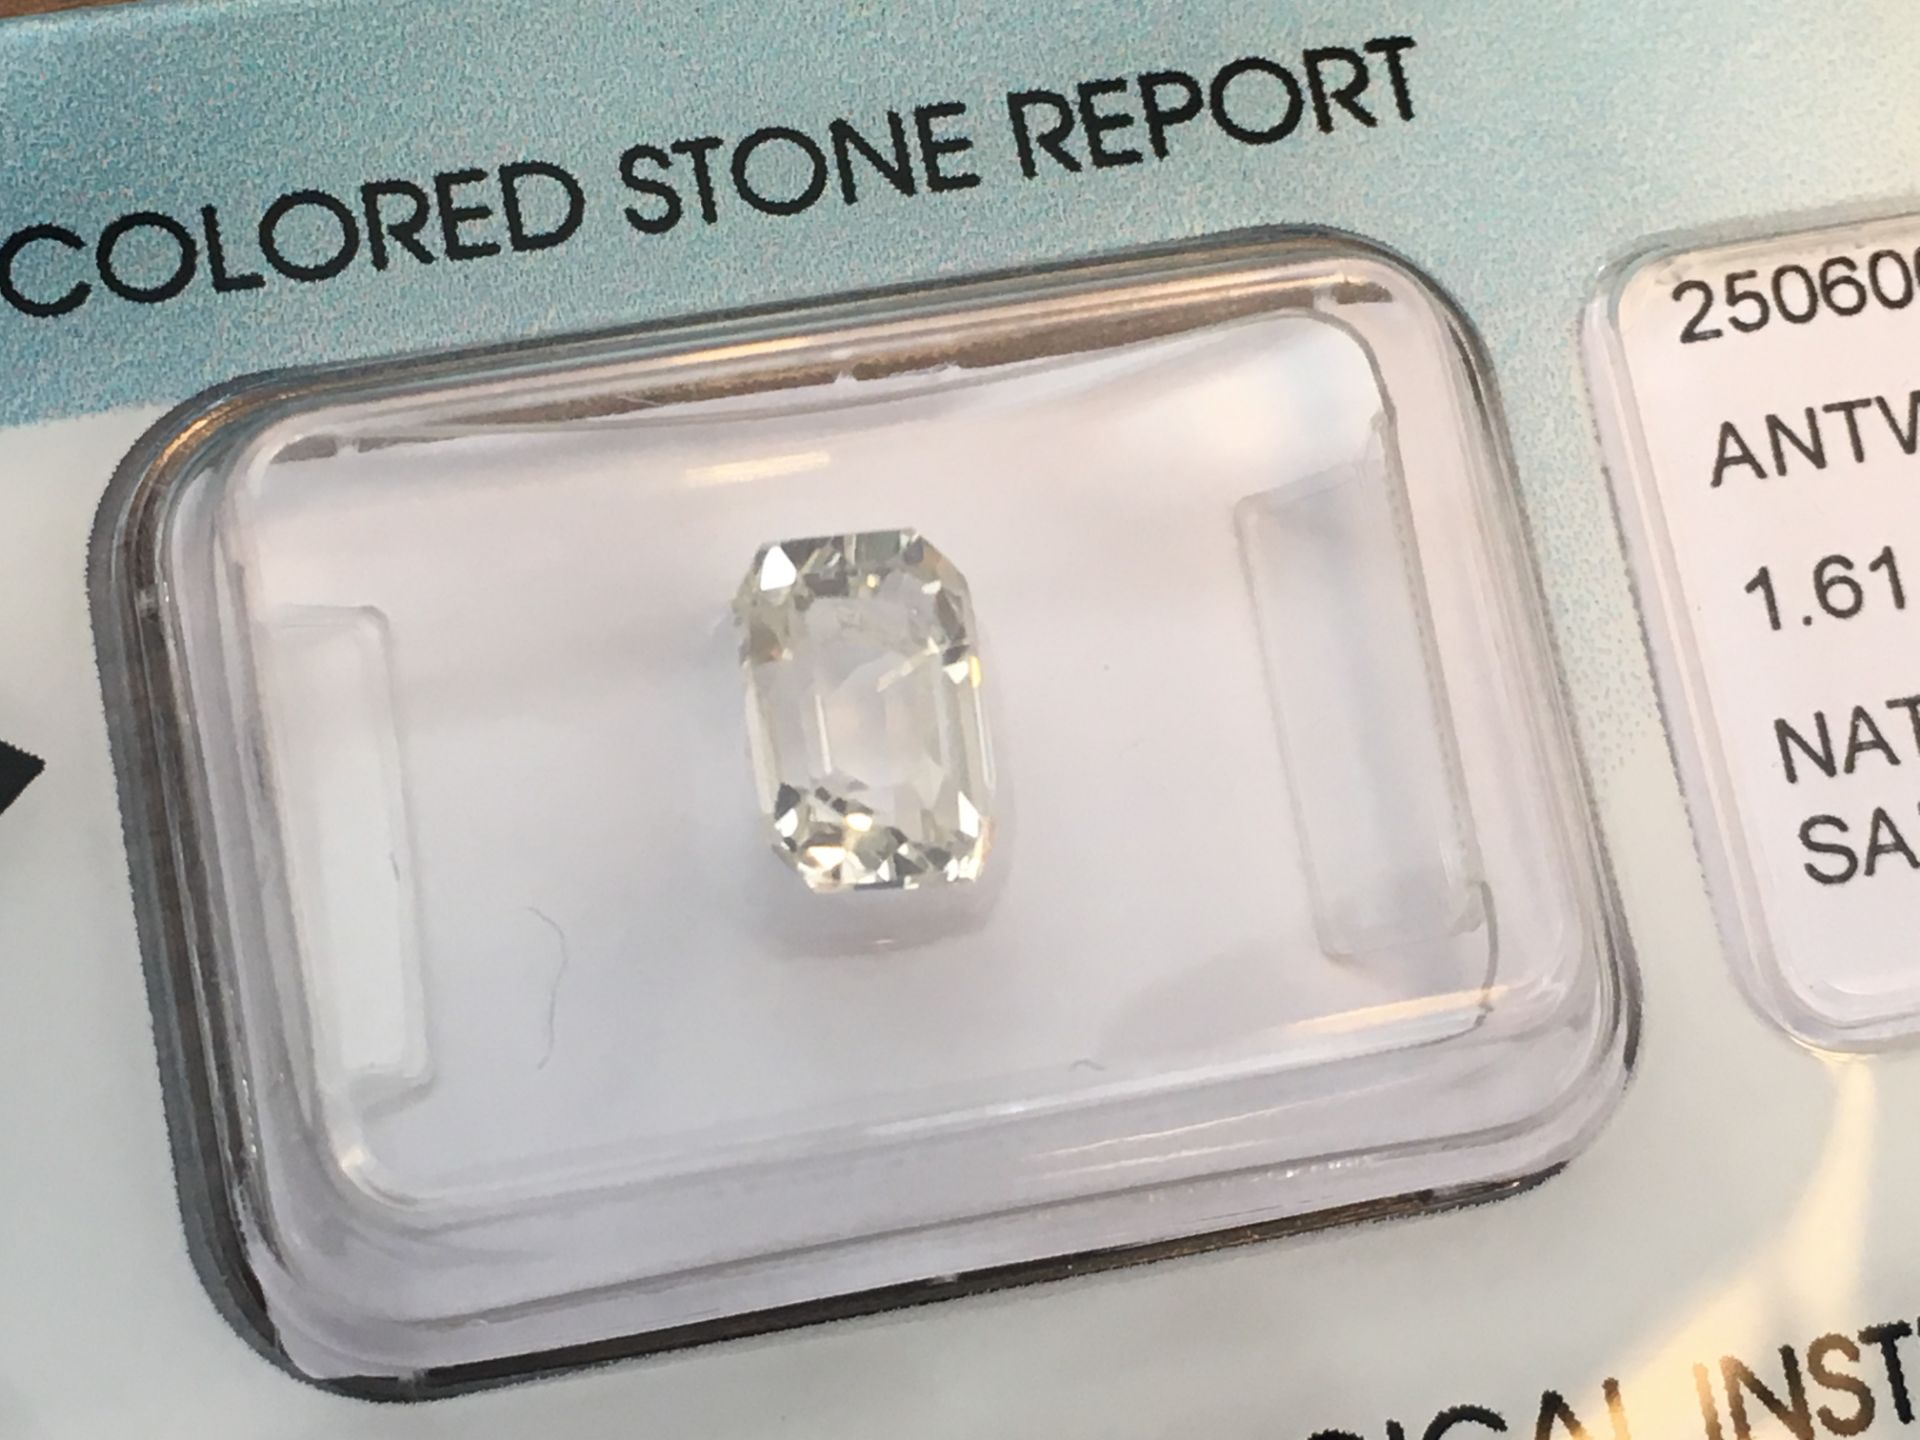 1.61ct Natural Yellow Sapphire with IGI Certificate - Report No' 250600658. Emerald Cut in Very